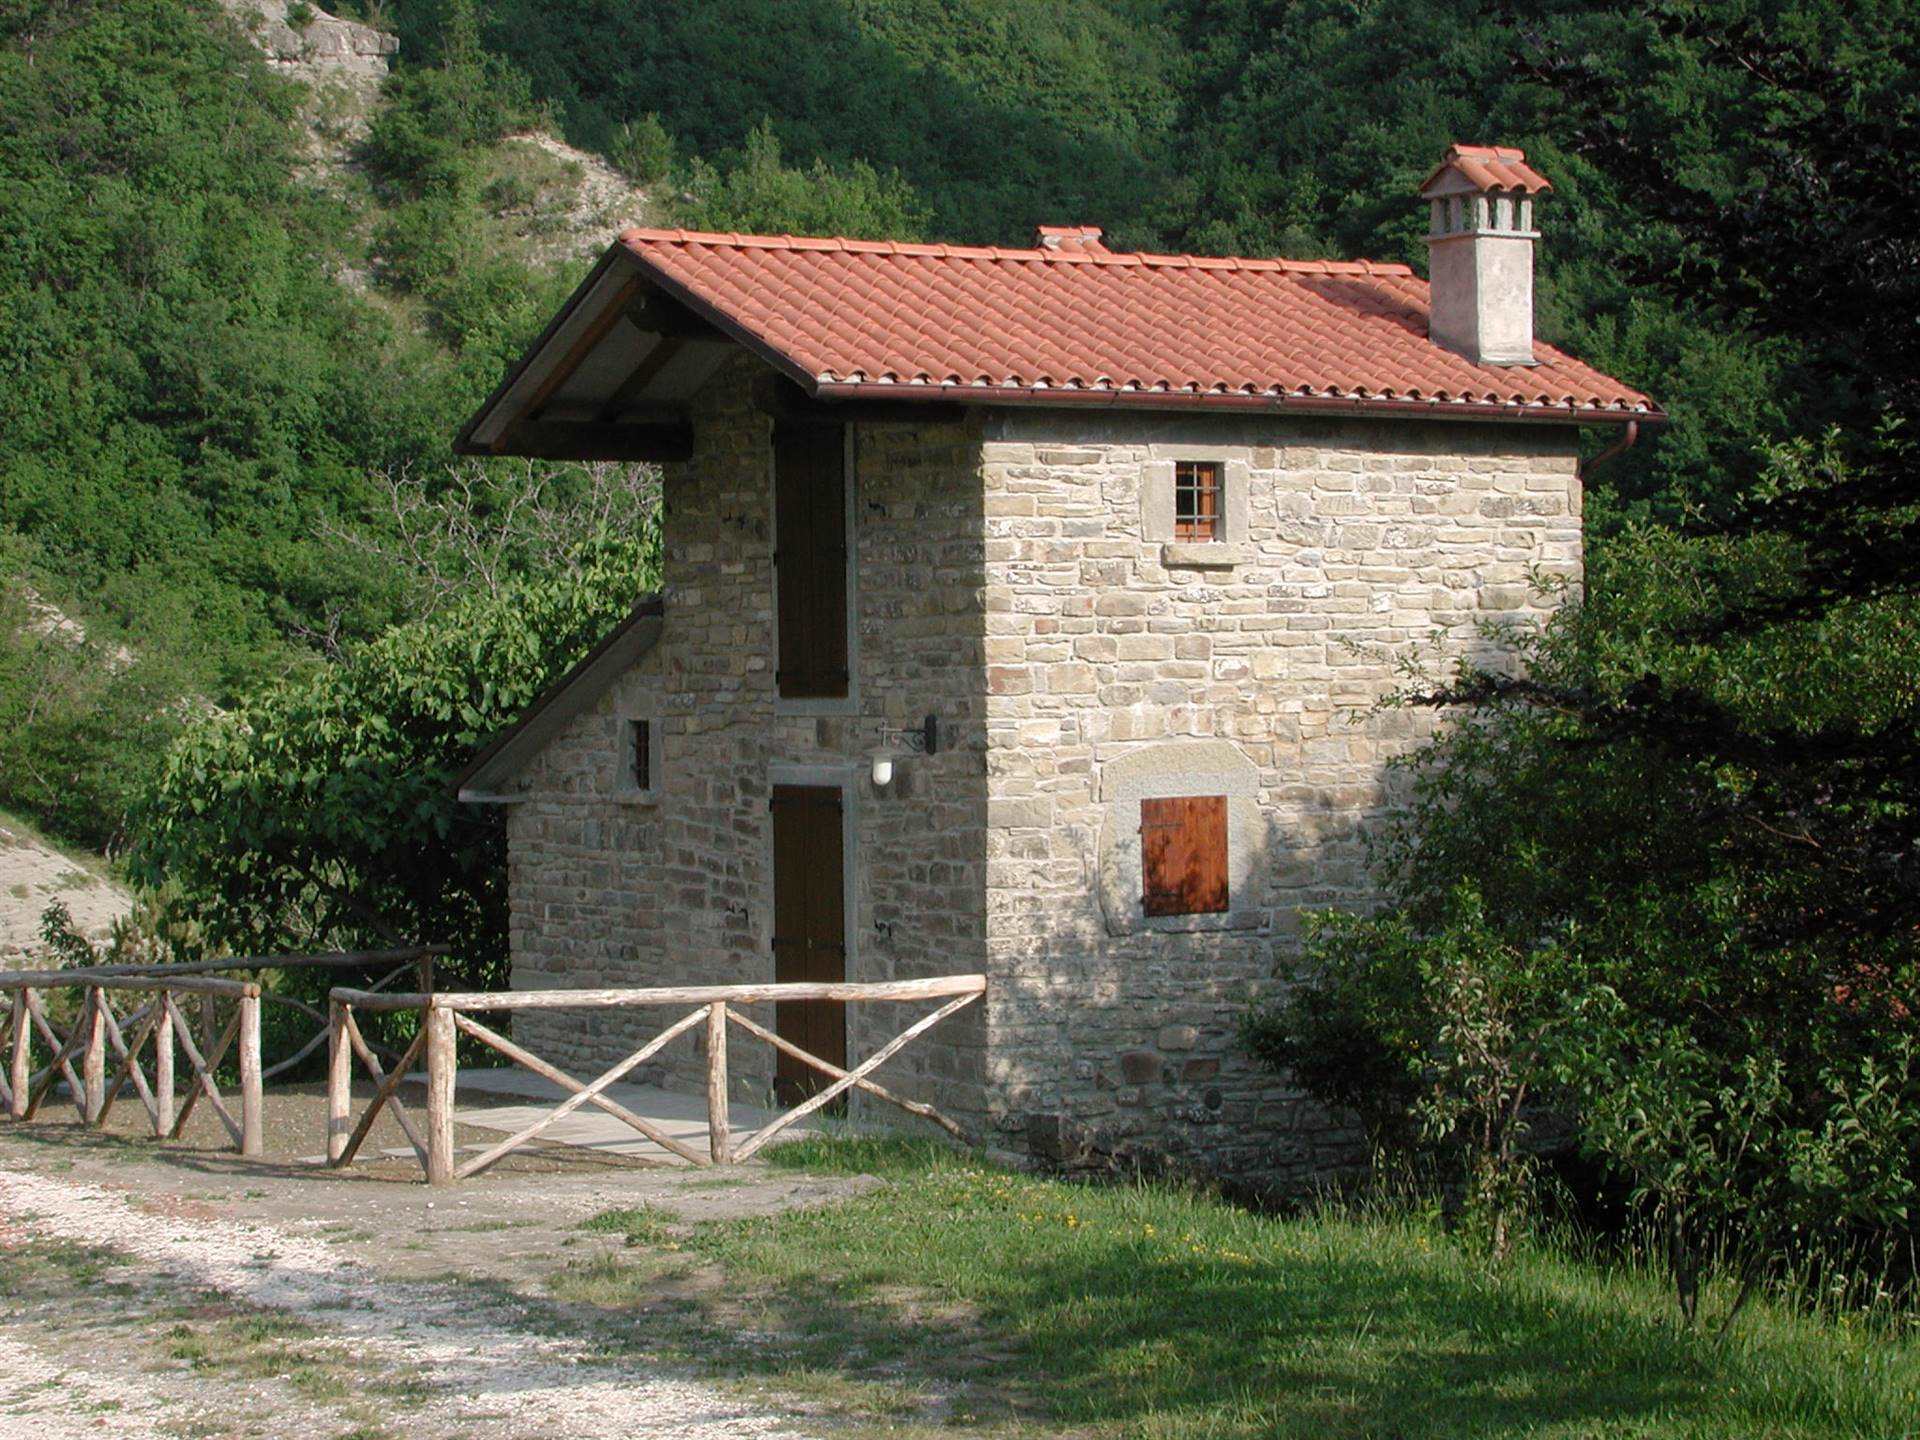 MARRADI, Detached house for rent of 38 Sq. mt., Restored, Heating Individual heating system, Energetic class: E, placed at Ground, composed by: 2 